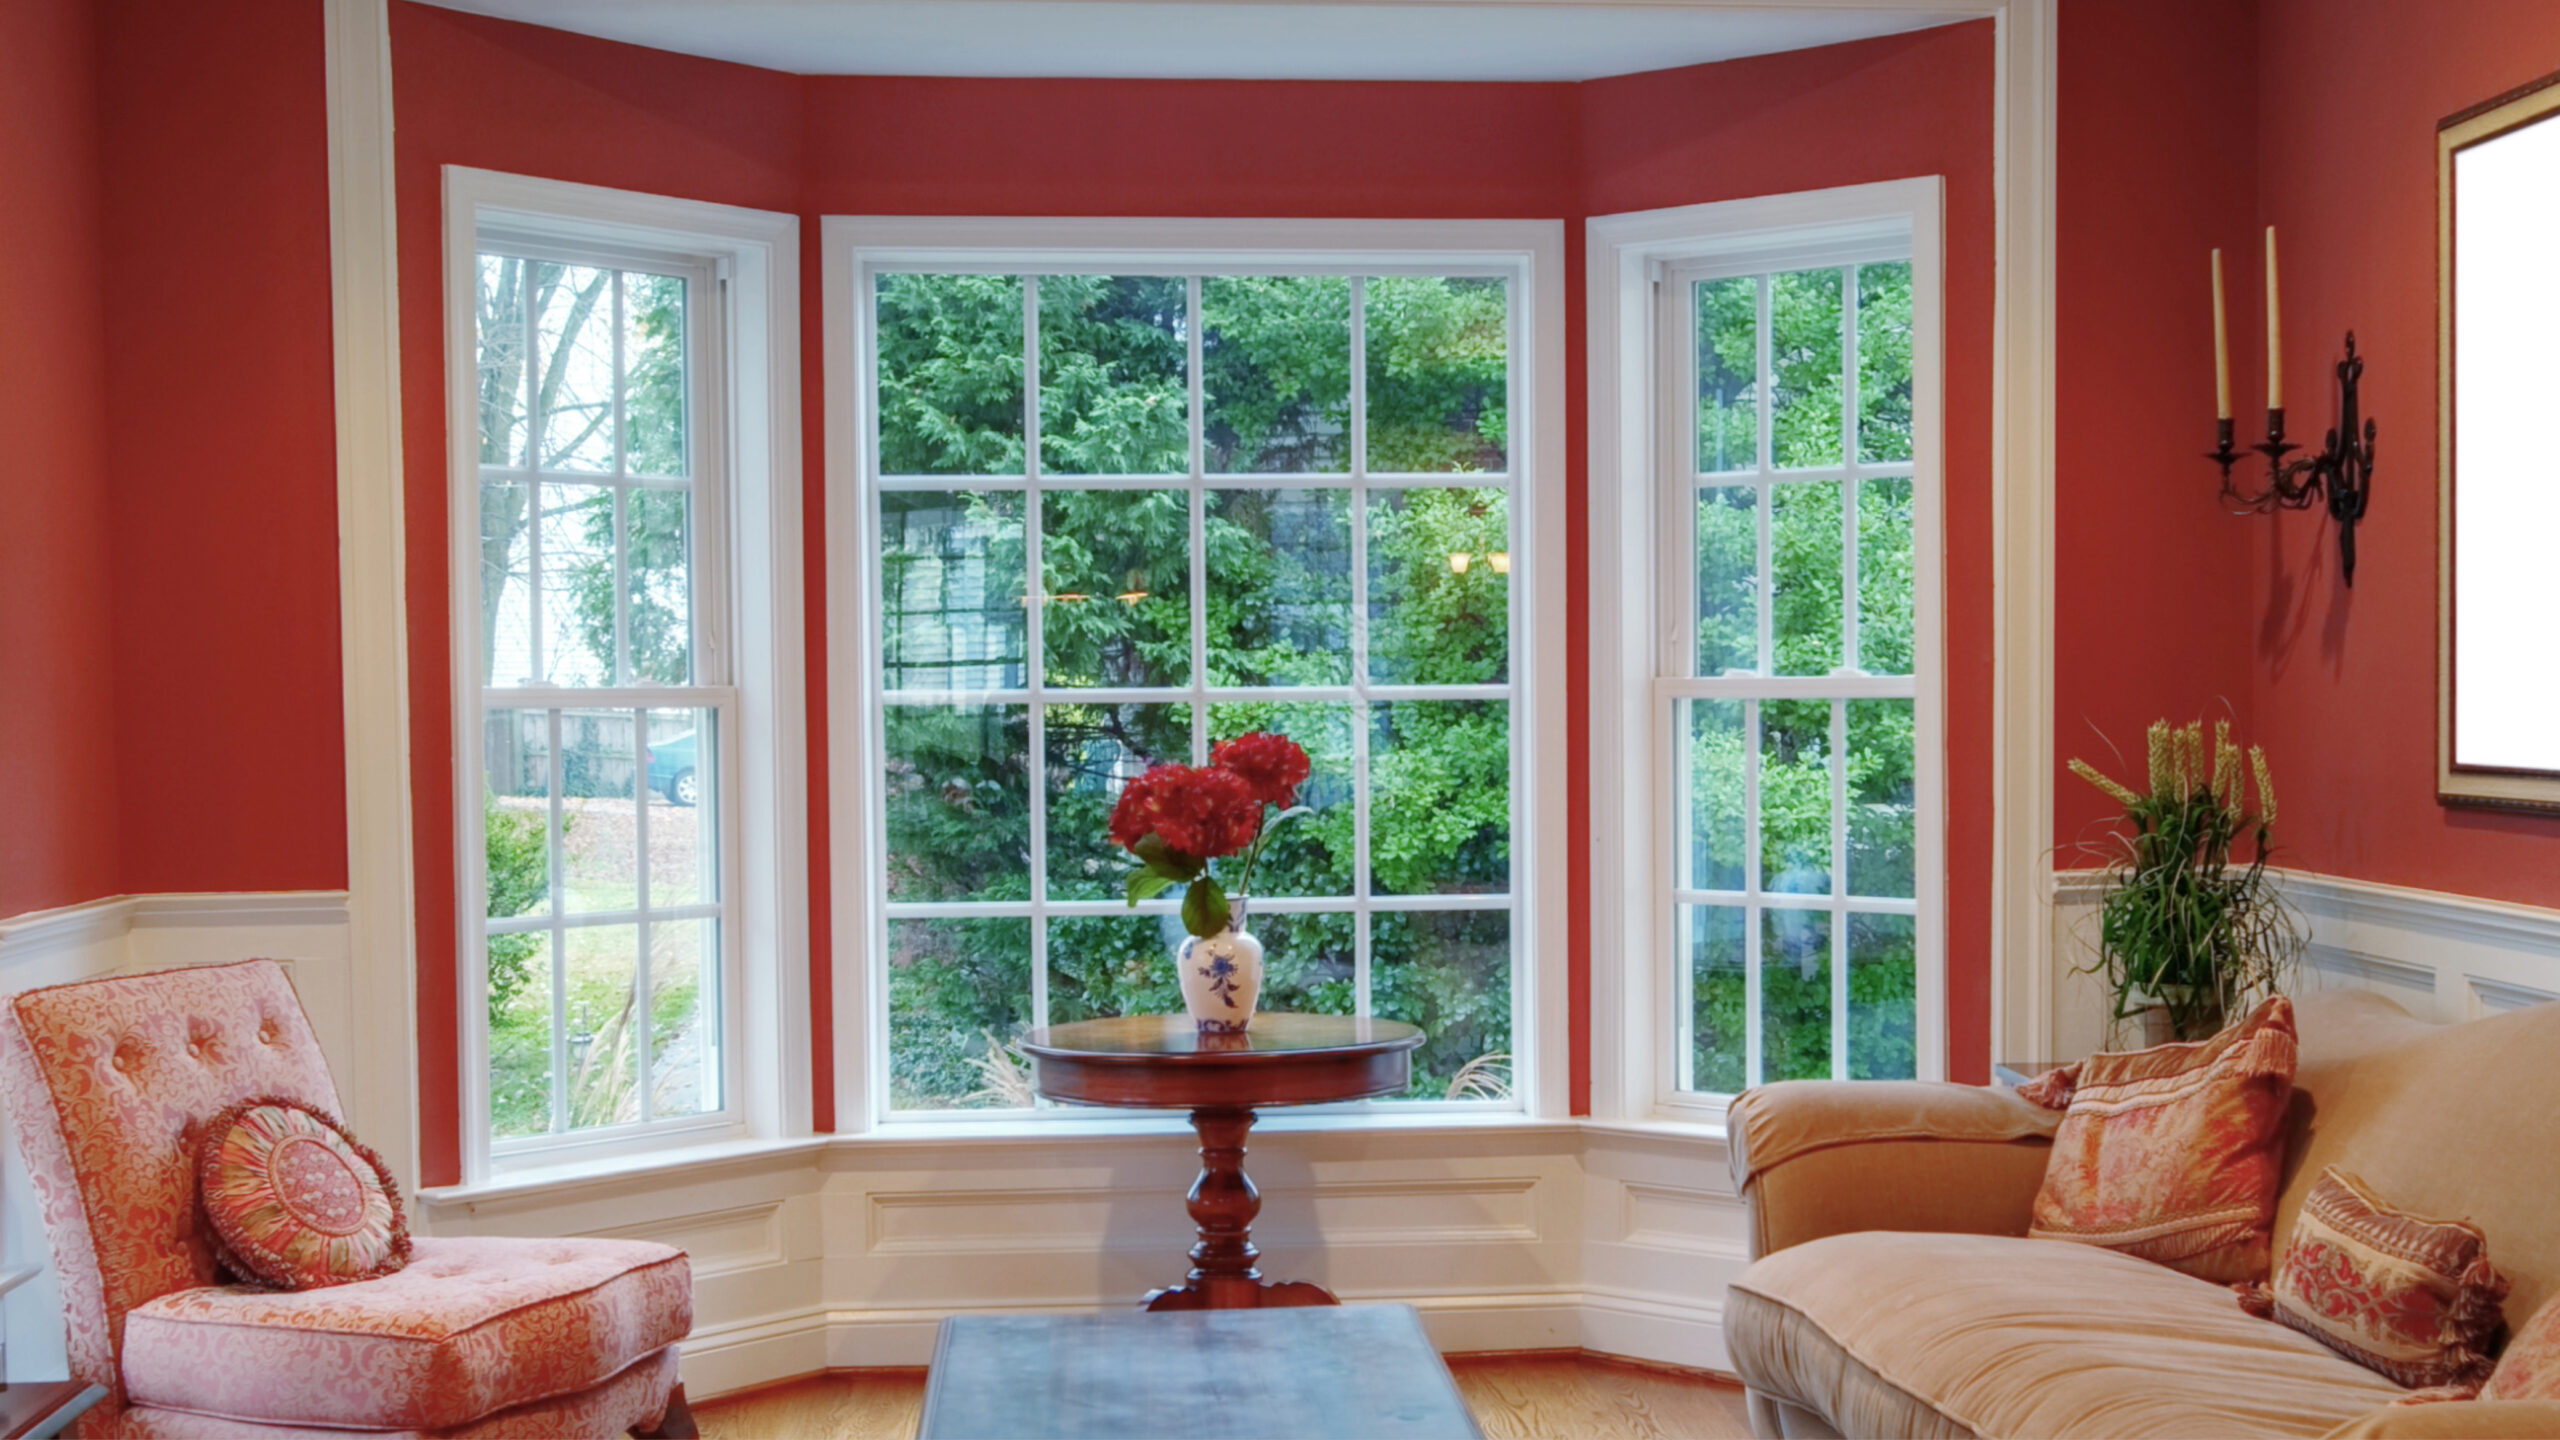 A window with white trim in a room with red walls